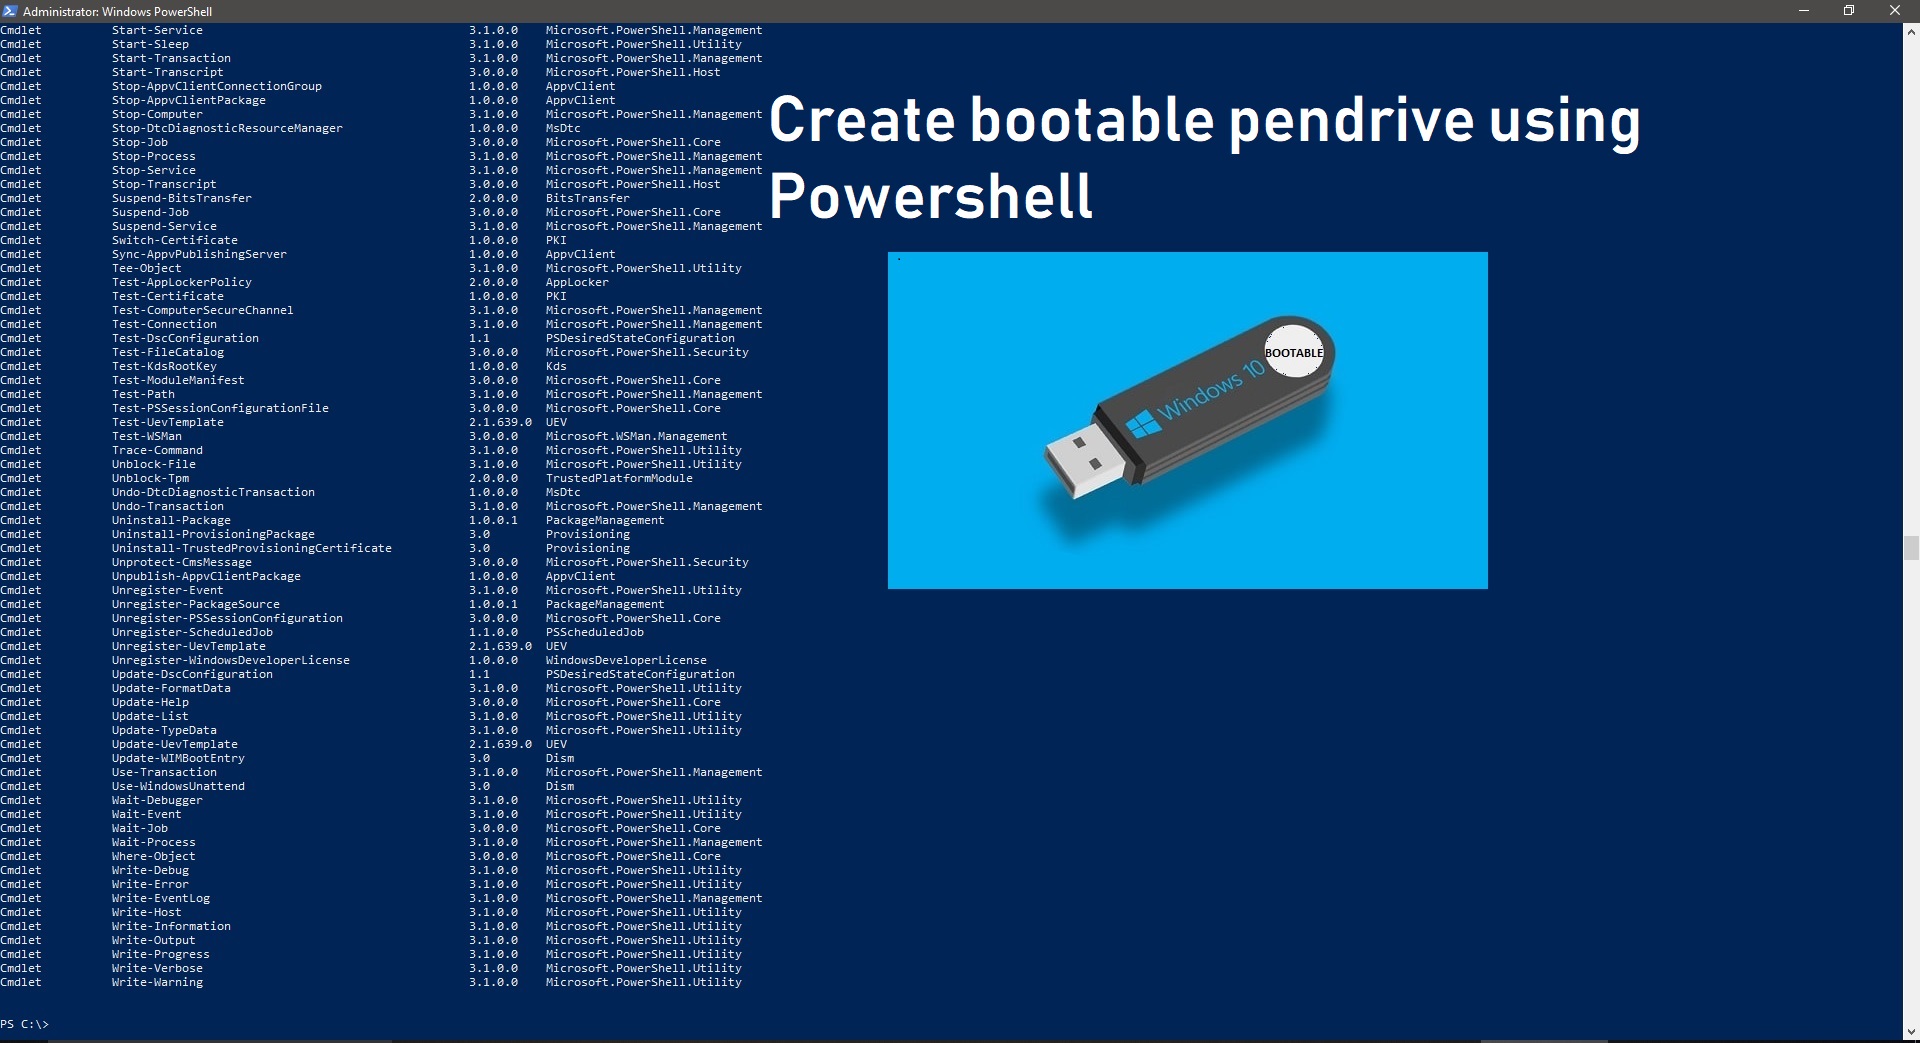 How to create a bootable USB disk using PowerShell?